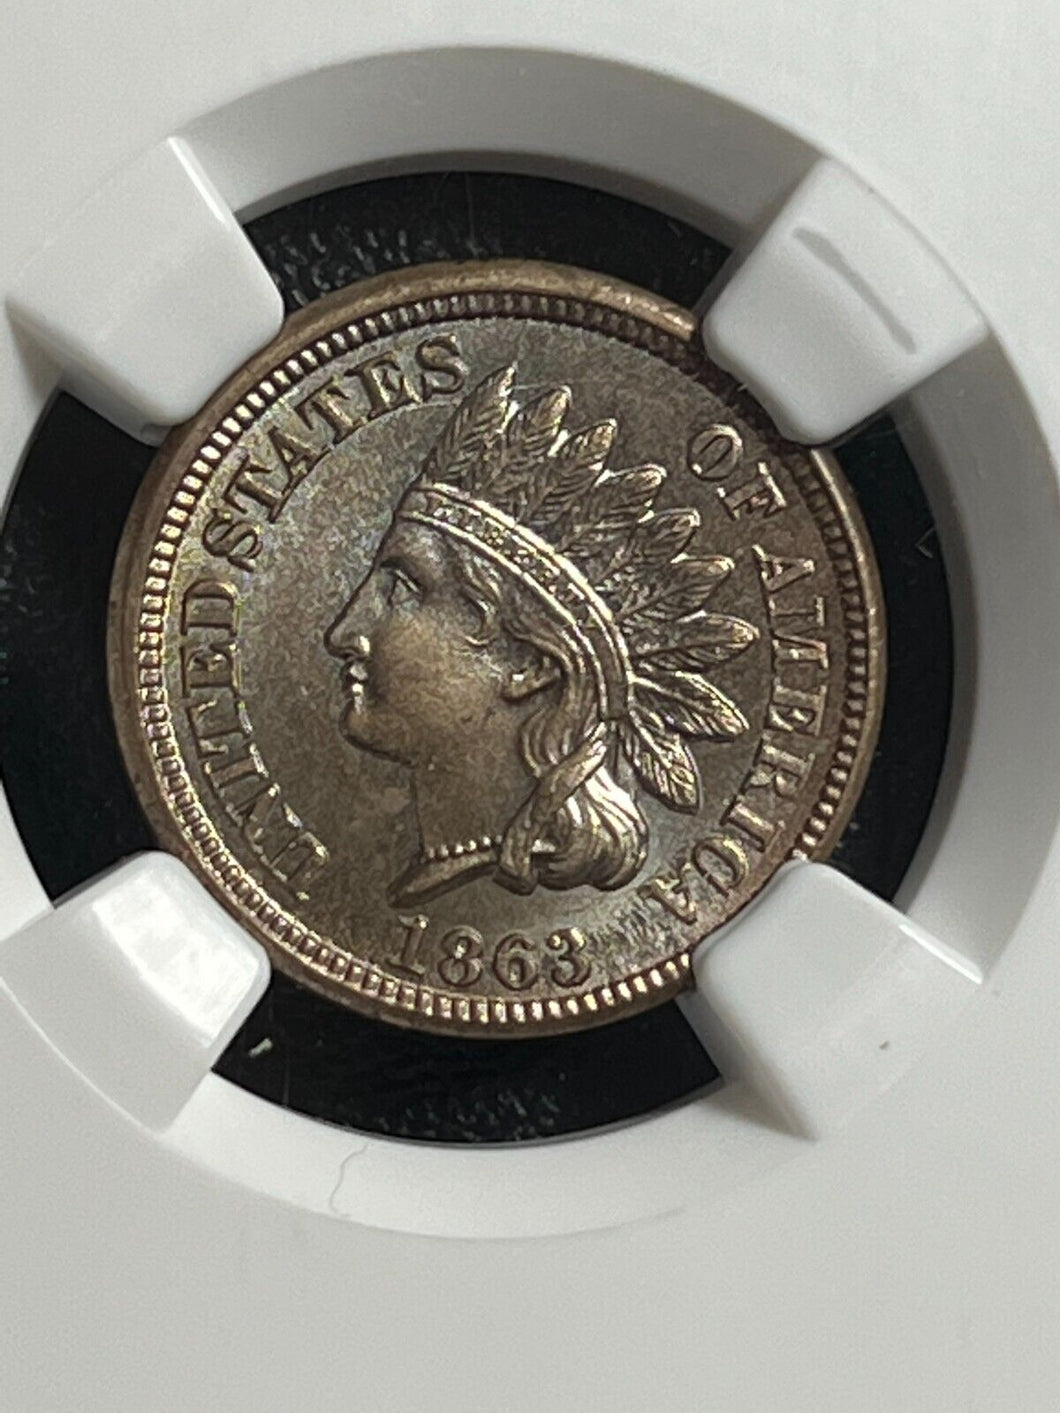 1863 1¢ Indian Cent NGC MS65 - Sharp Coin!